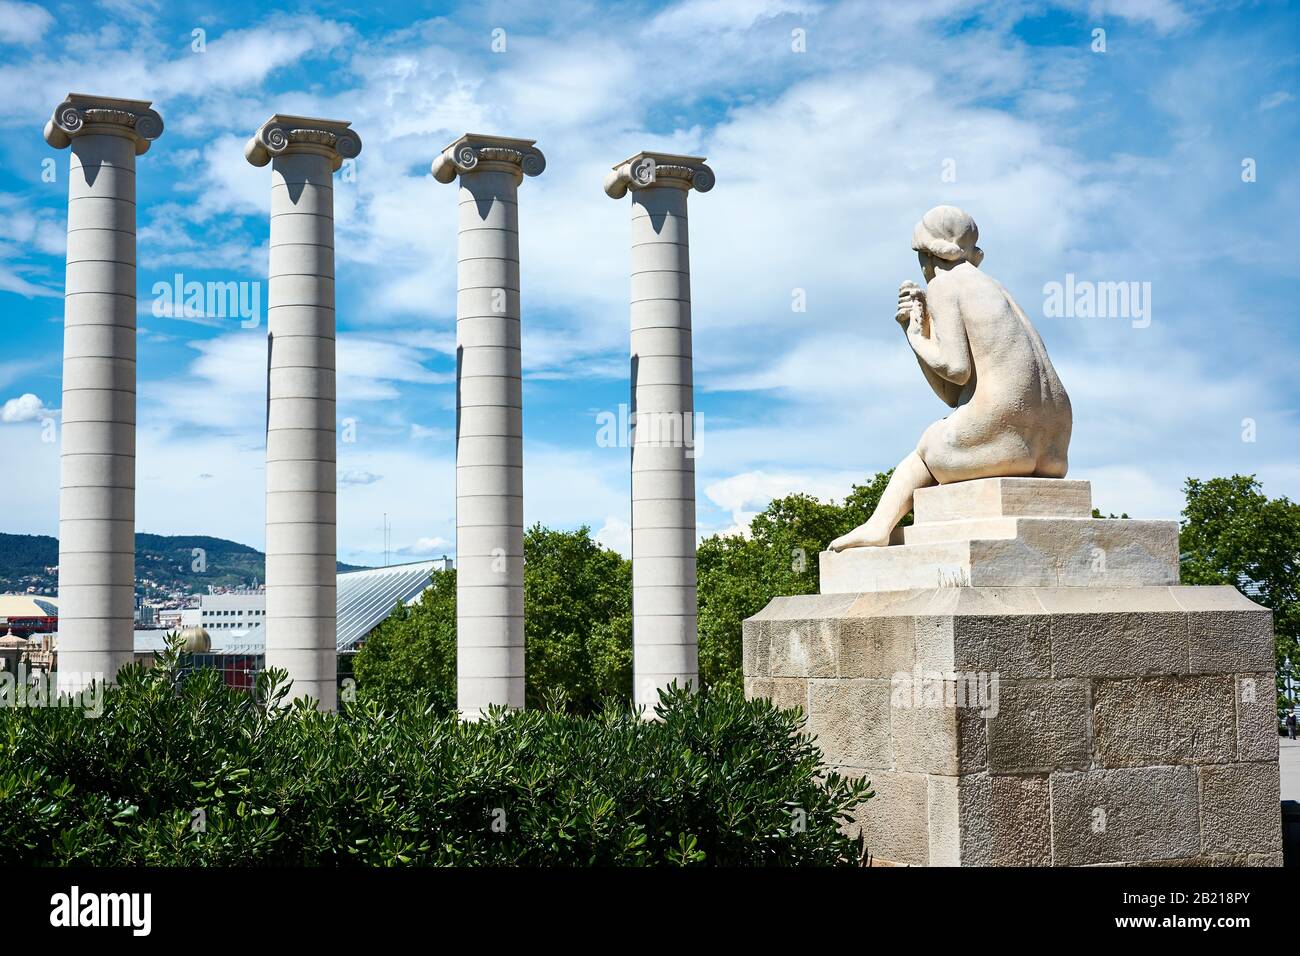 BARCELONA, SPAIN - MAY 13, 2017: Female sculpture and the iconic Four Columns on Montjuic hill in the center of the city. Stock Photo